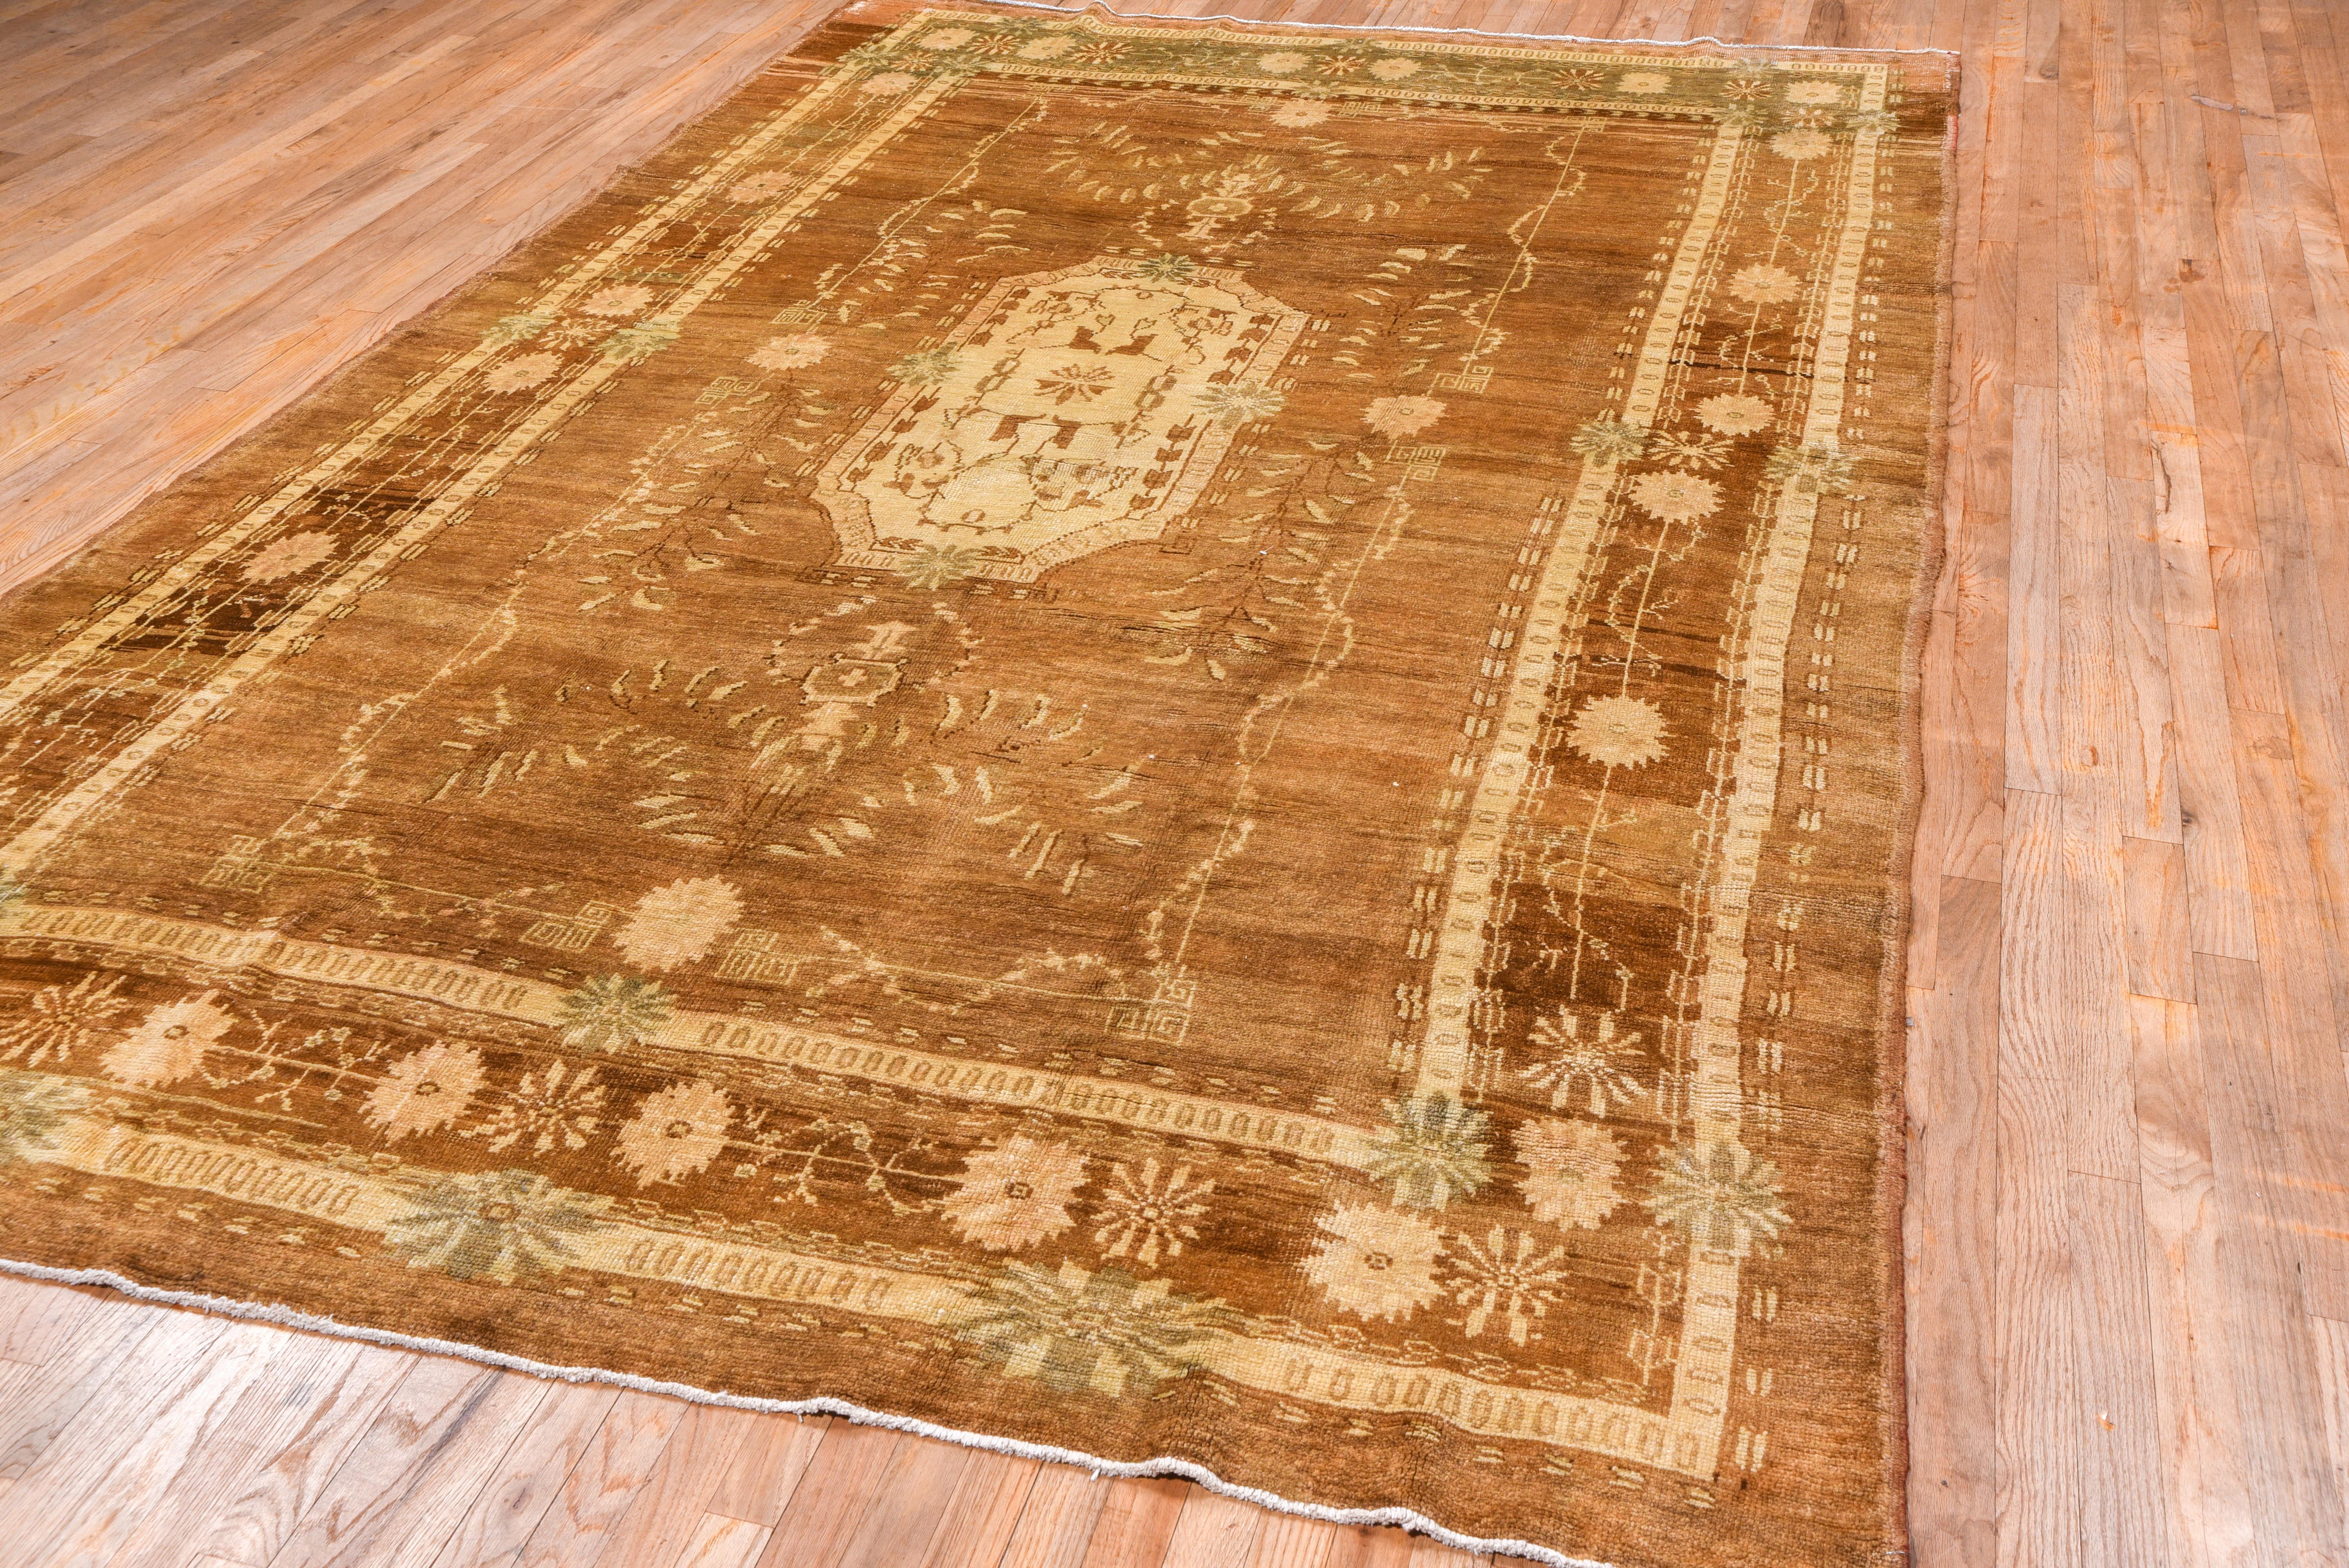 Oushak Mid-20th Century Brown Turkish Kars Rug, Brown Field, circa 1950s For Sale